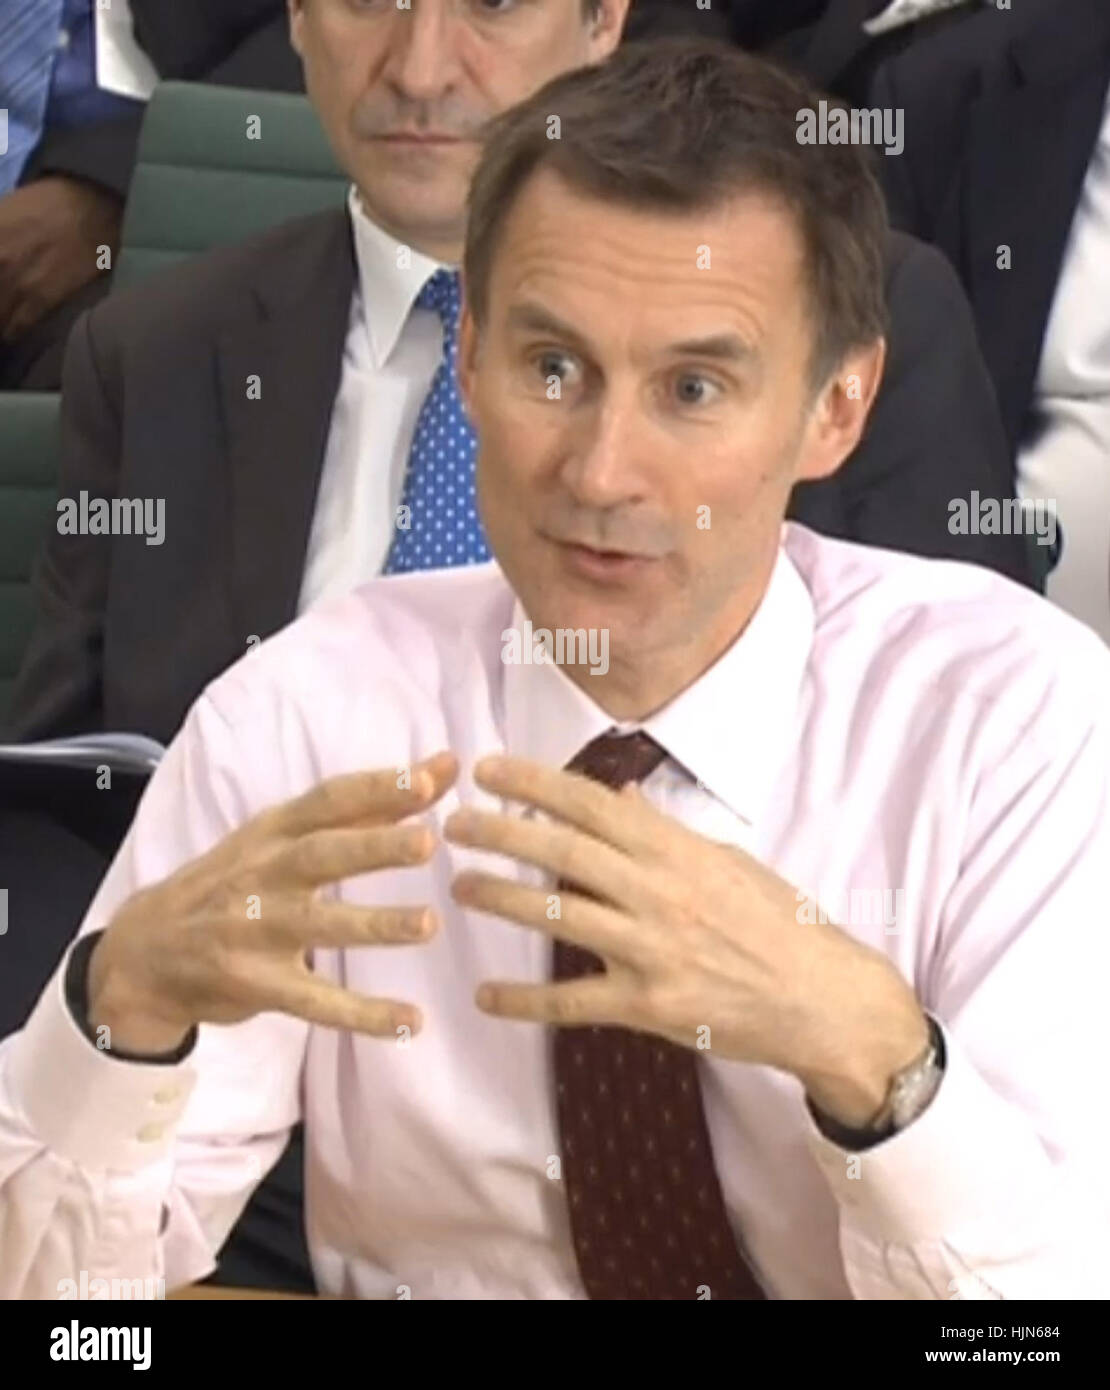 Health Secretary Jeremy Hunt gives evidence to the Commons Health Committee about Brexit and health and social care, at Portcullis House, London. Stock Photo